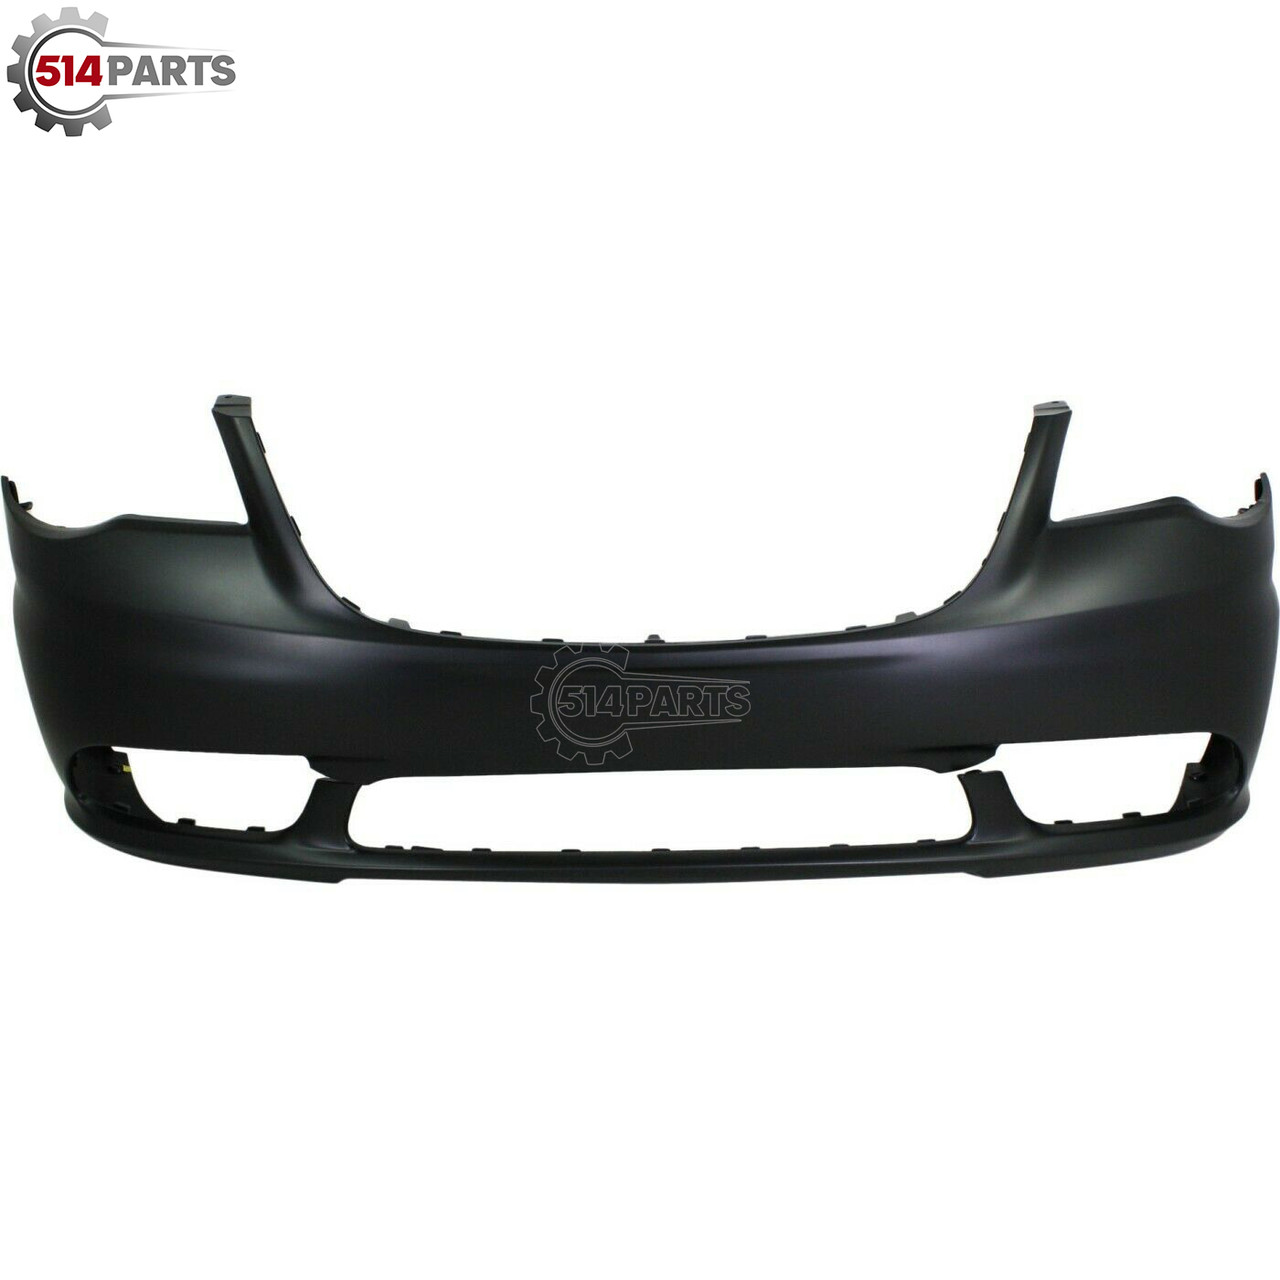 2011 - 2016 CHRYSLER TOWN and COUNTRY FRONT BUMPER COVER without HEADLIGHT WASHER HOLES - PARE-CHOCS AVANT sans TROUS de LAVE-PHARE